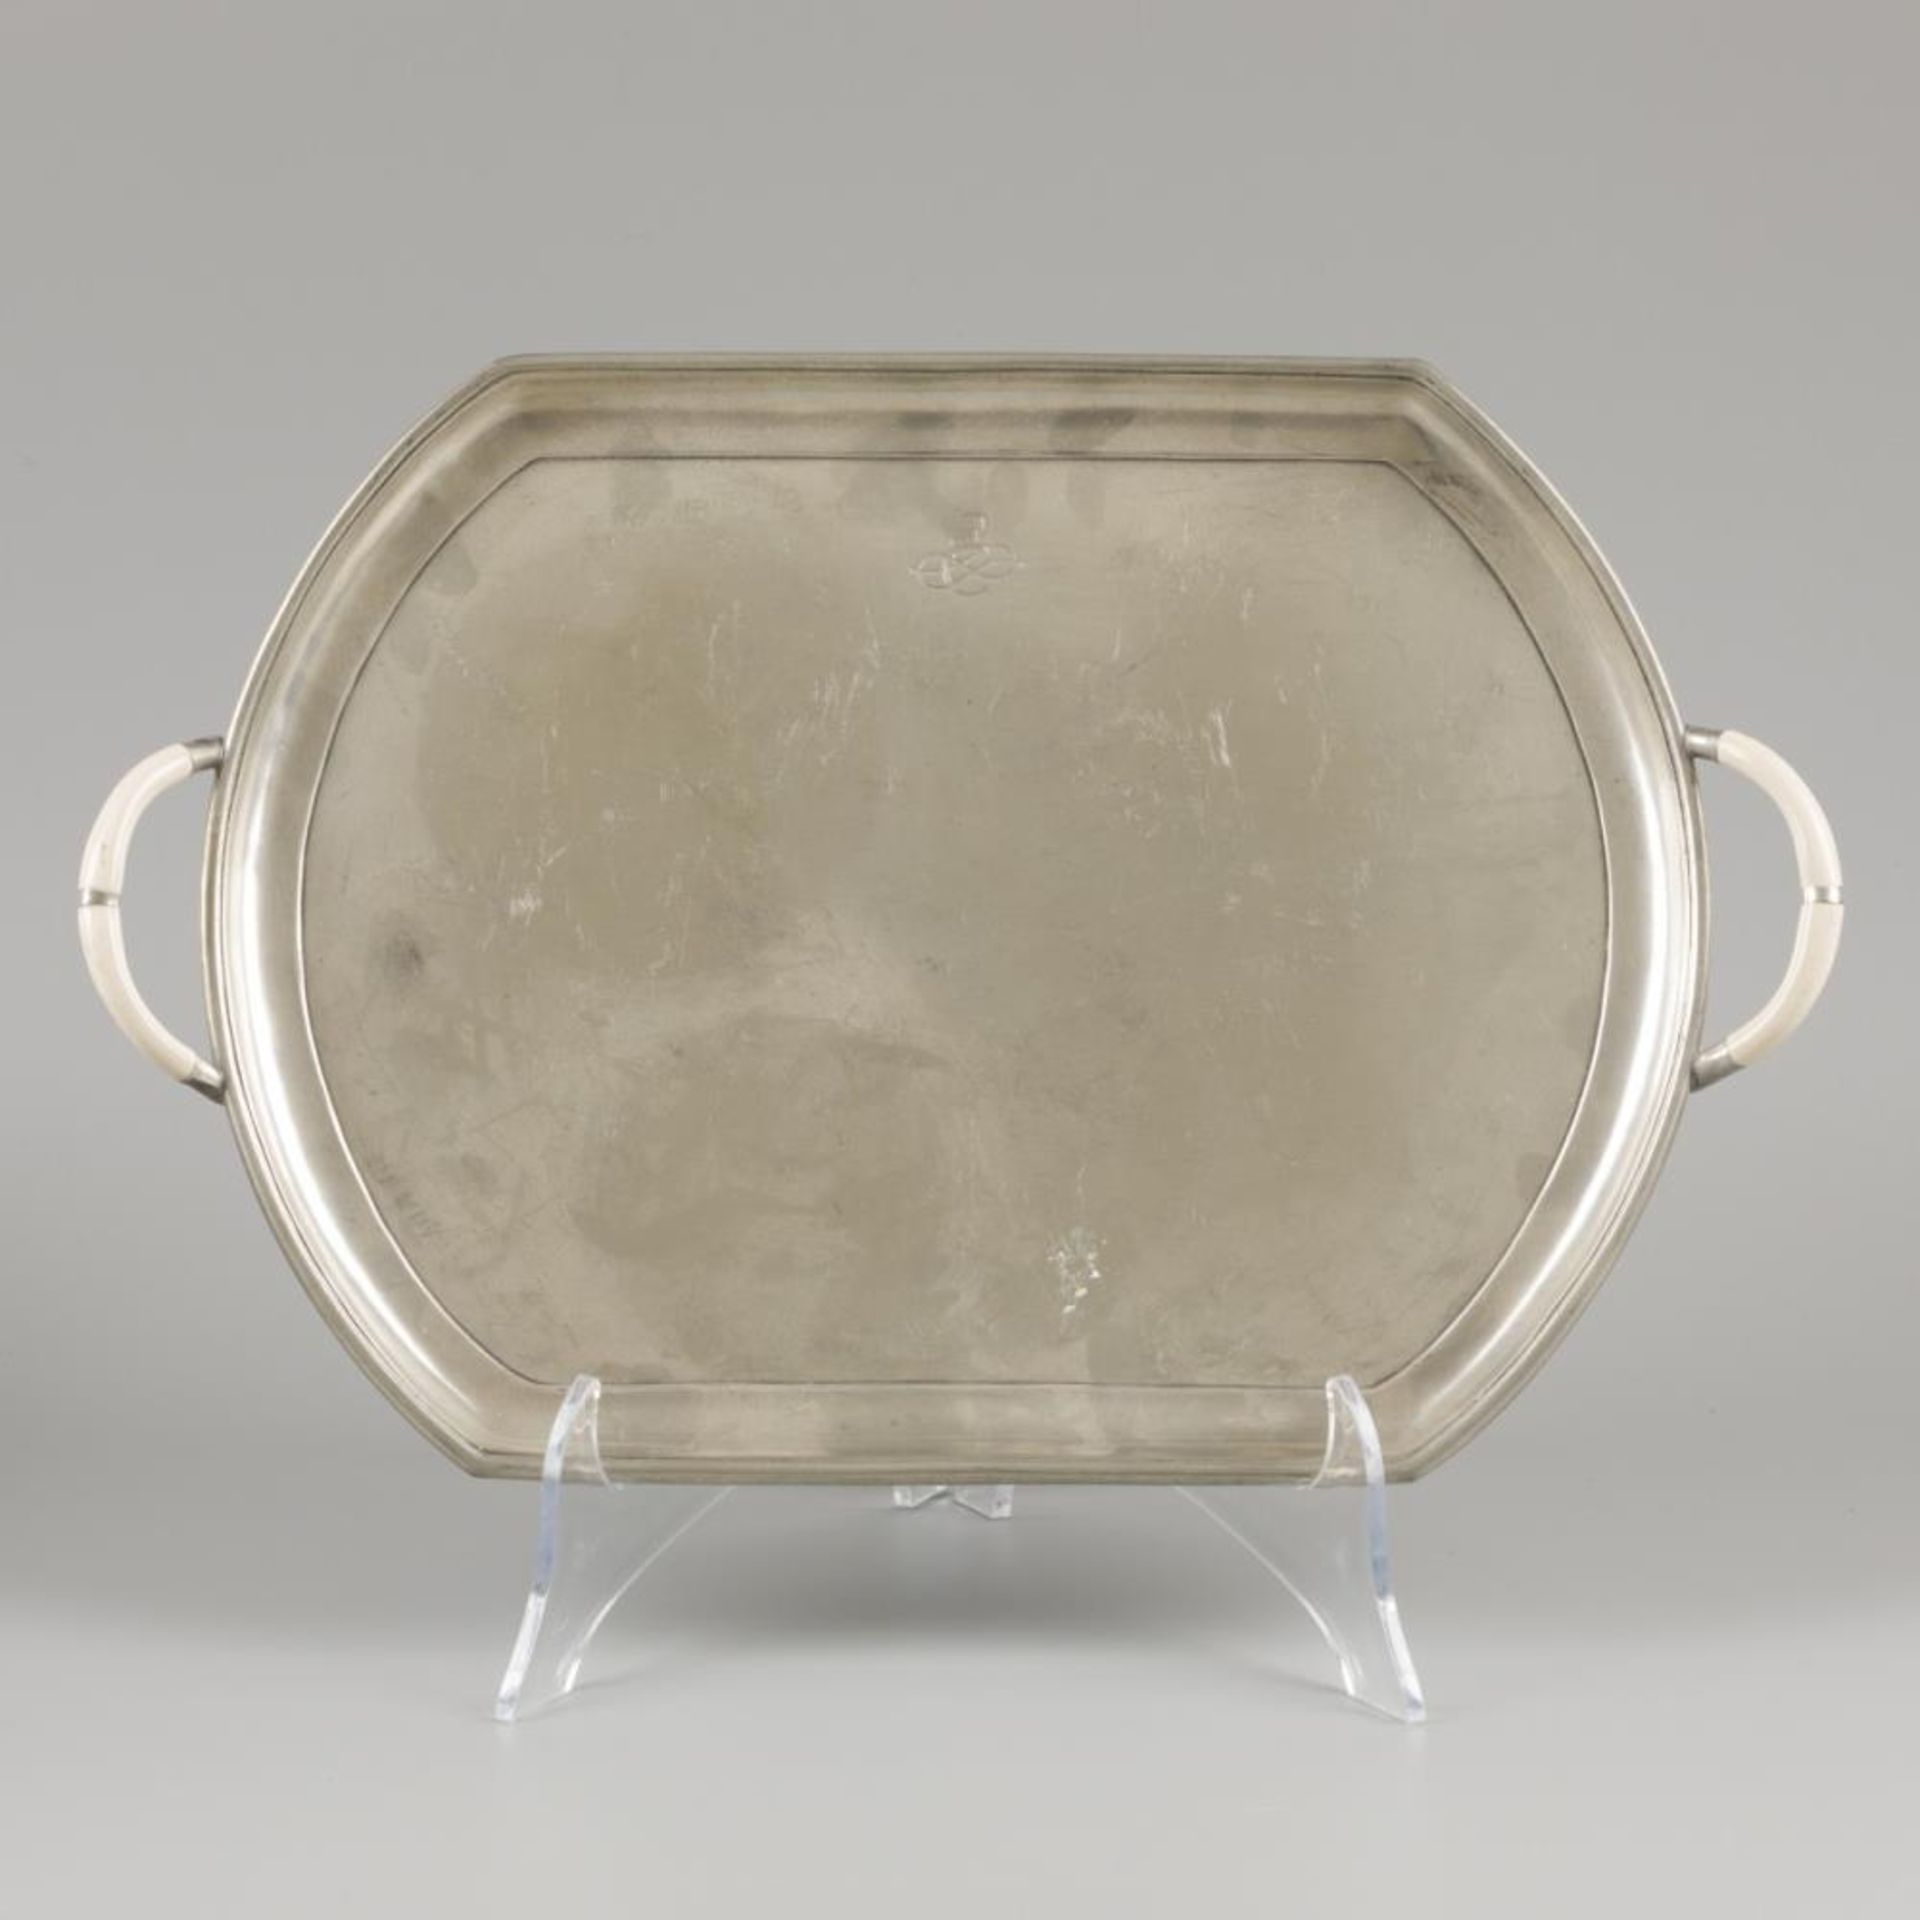 A collection of plate items, originating from a ship, 20th century. - Image 2 of 8